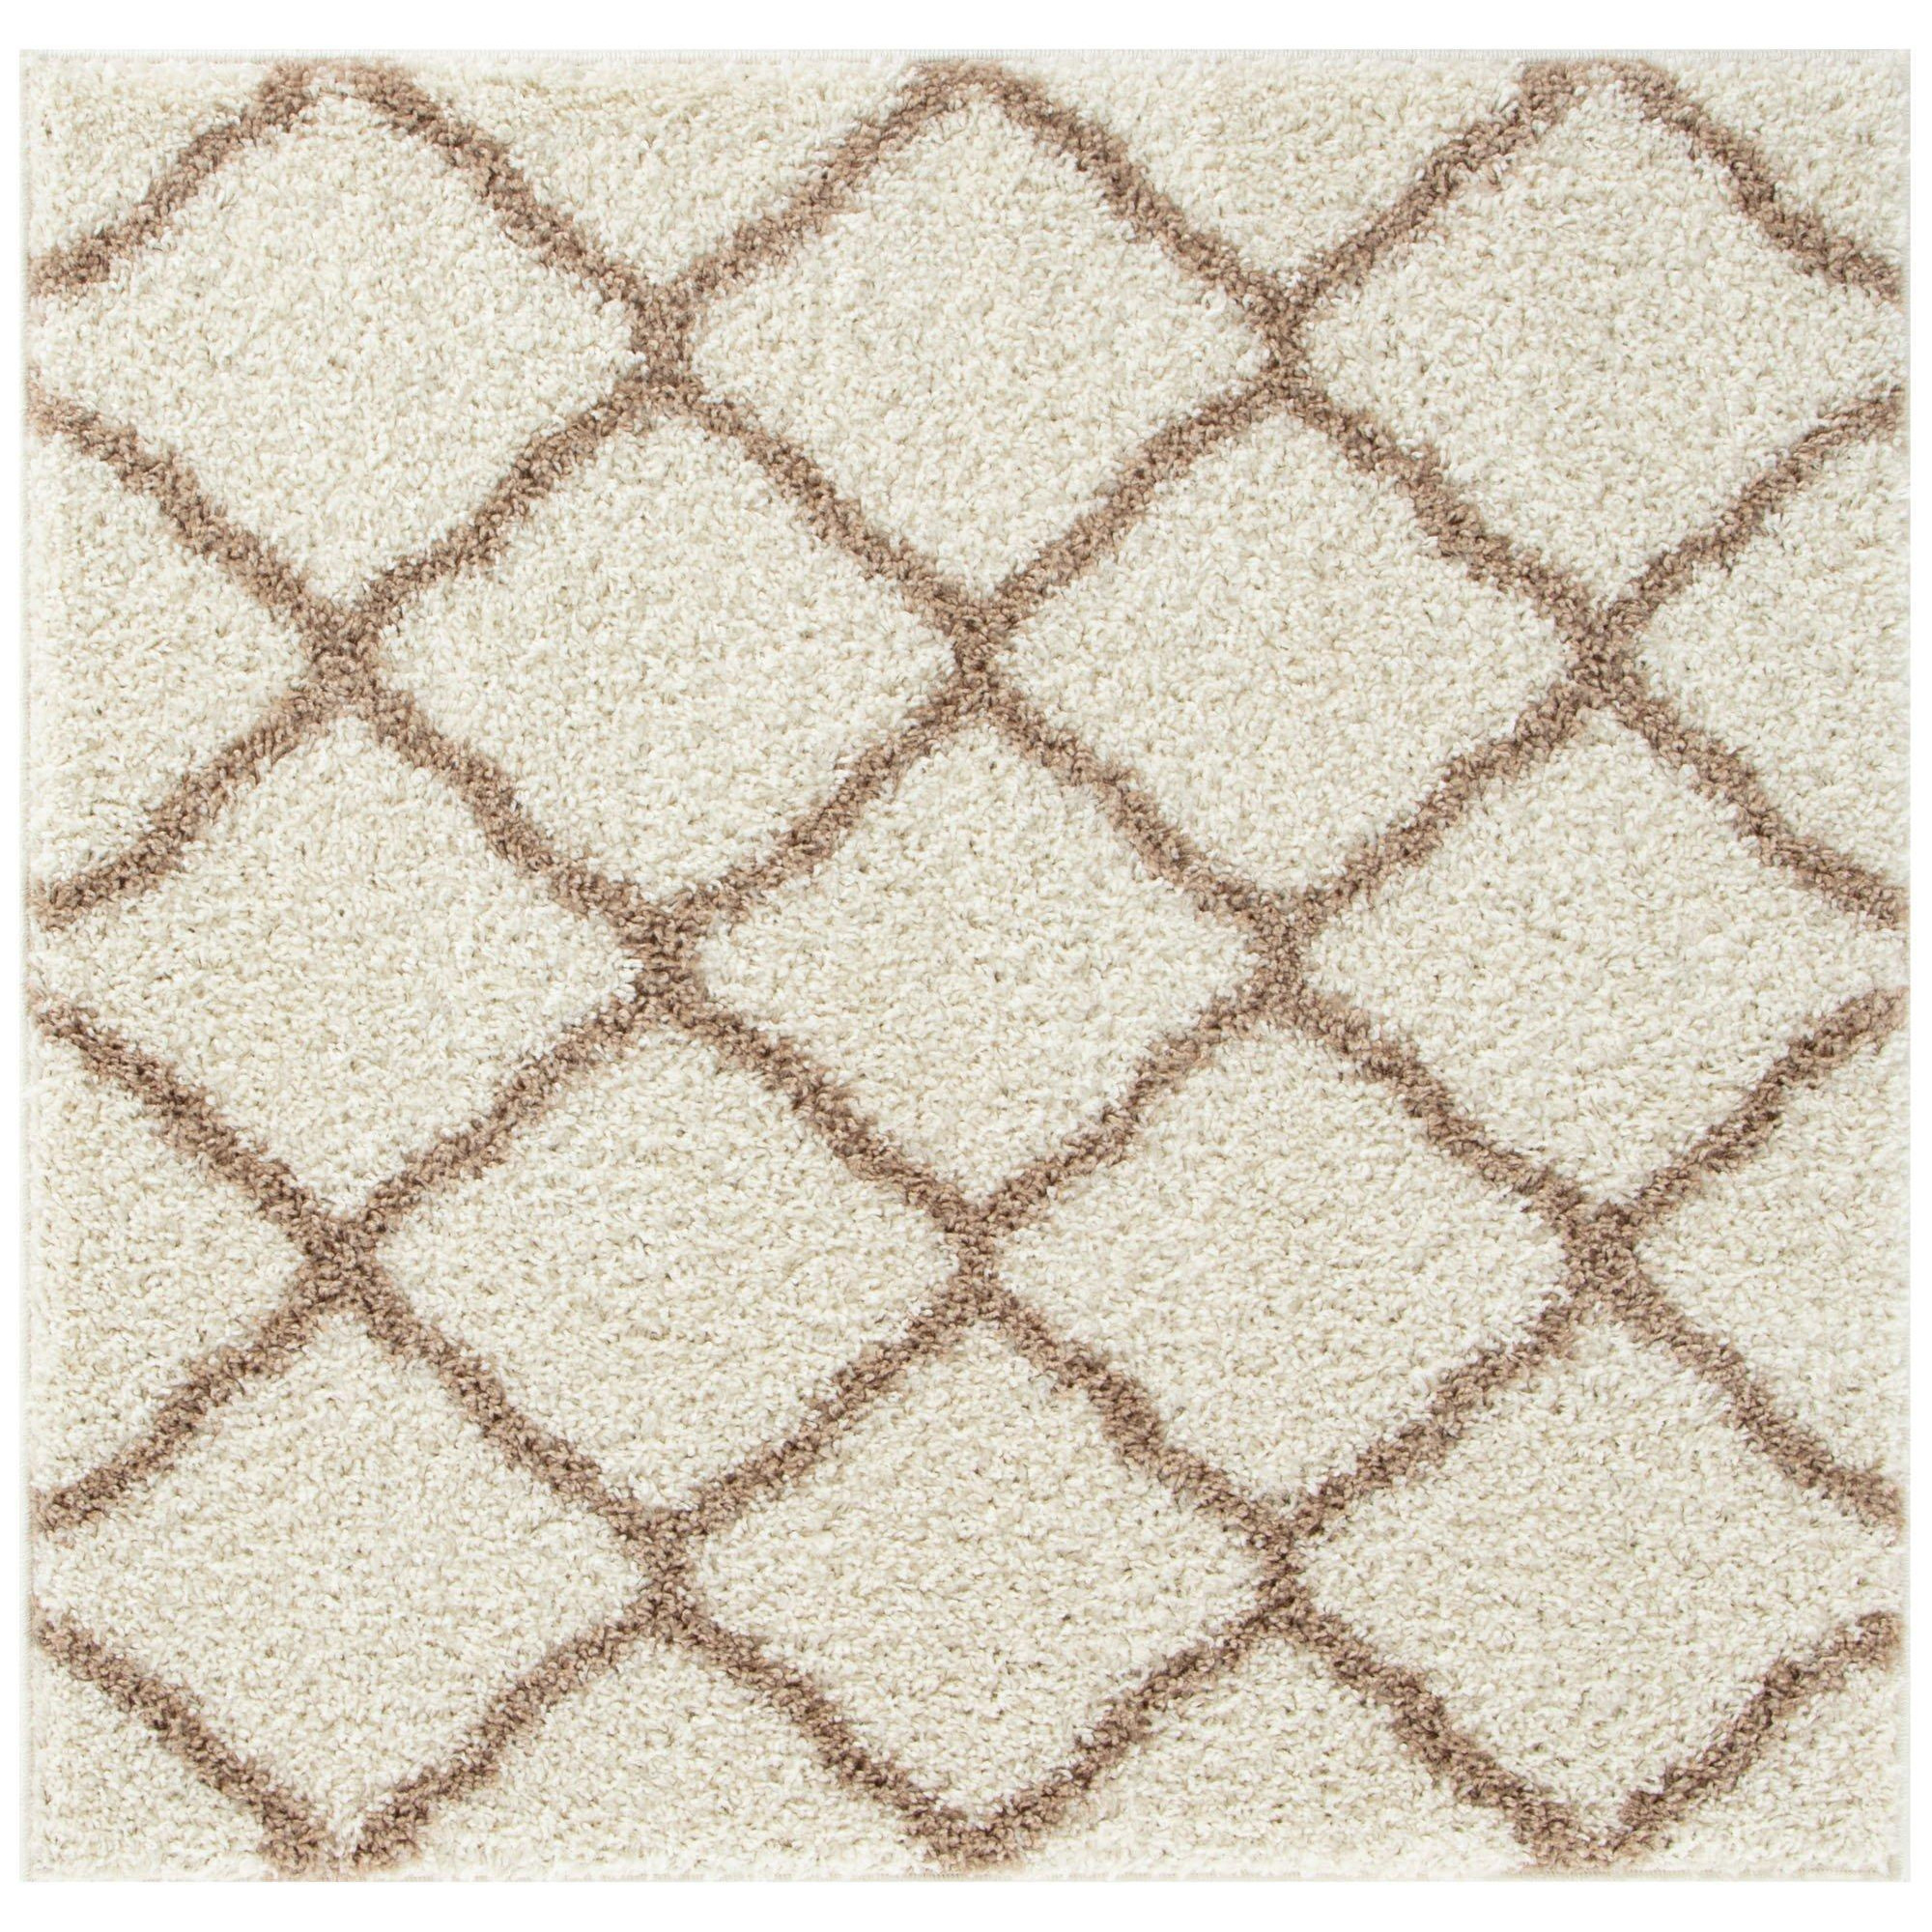 Myshaggy Collection Rugs Moroccan Design in Ivory Beige - 385 IB - image 1